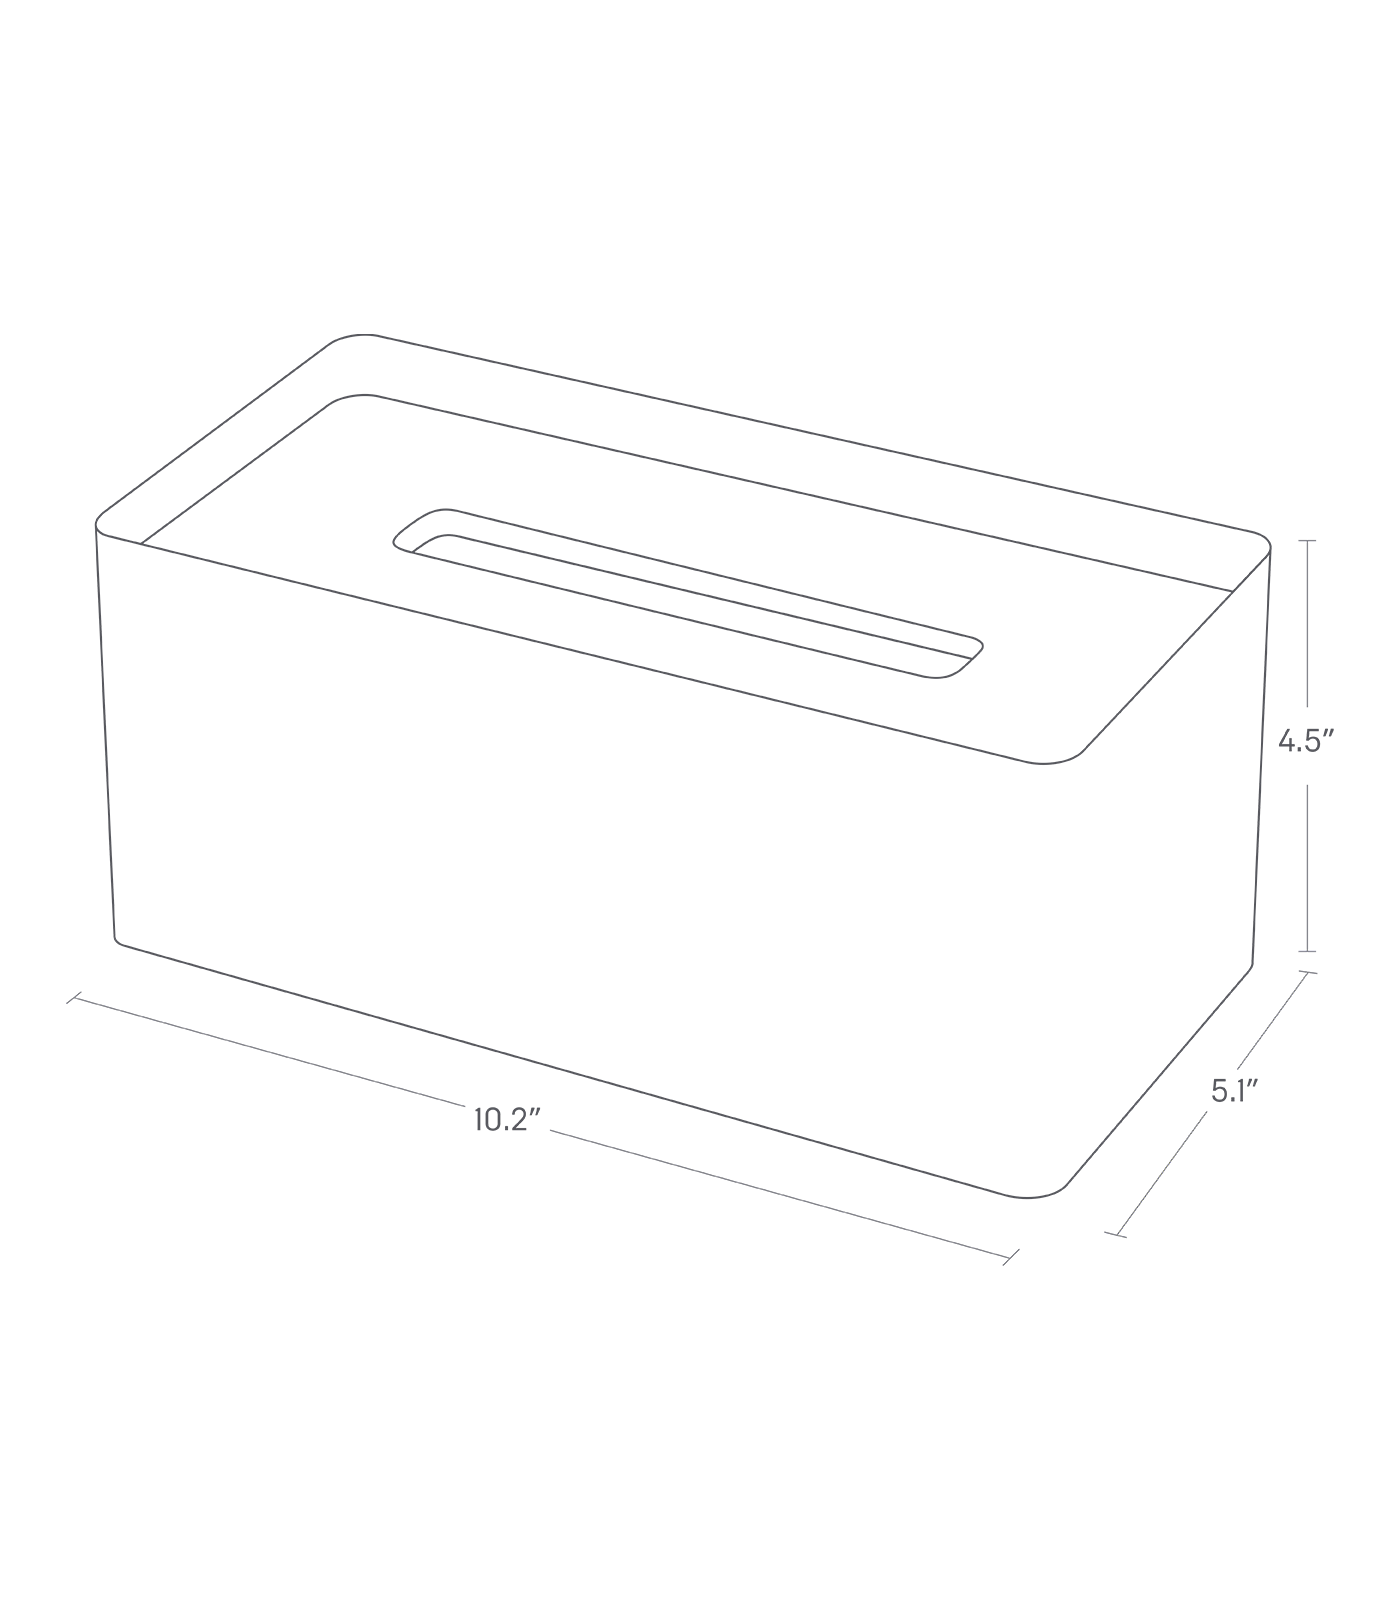 Dimension Image for Tissue Case on a white background showing height of 4.5